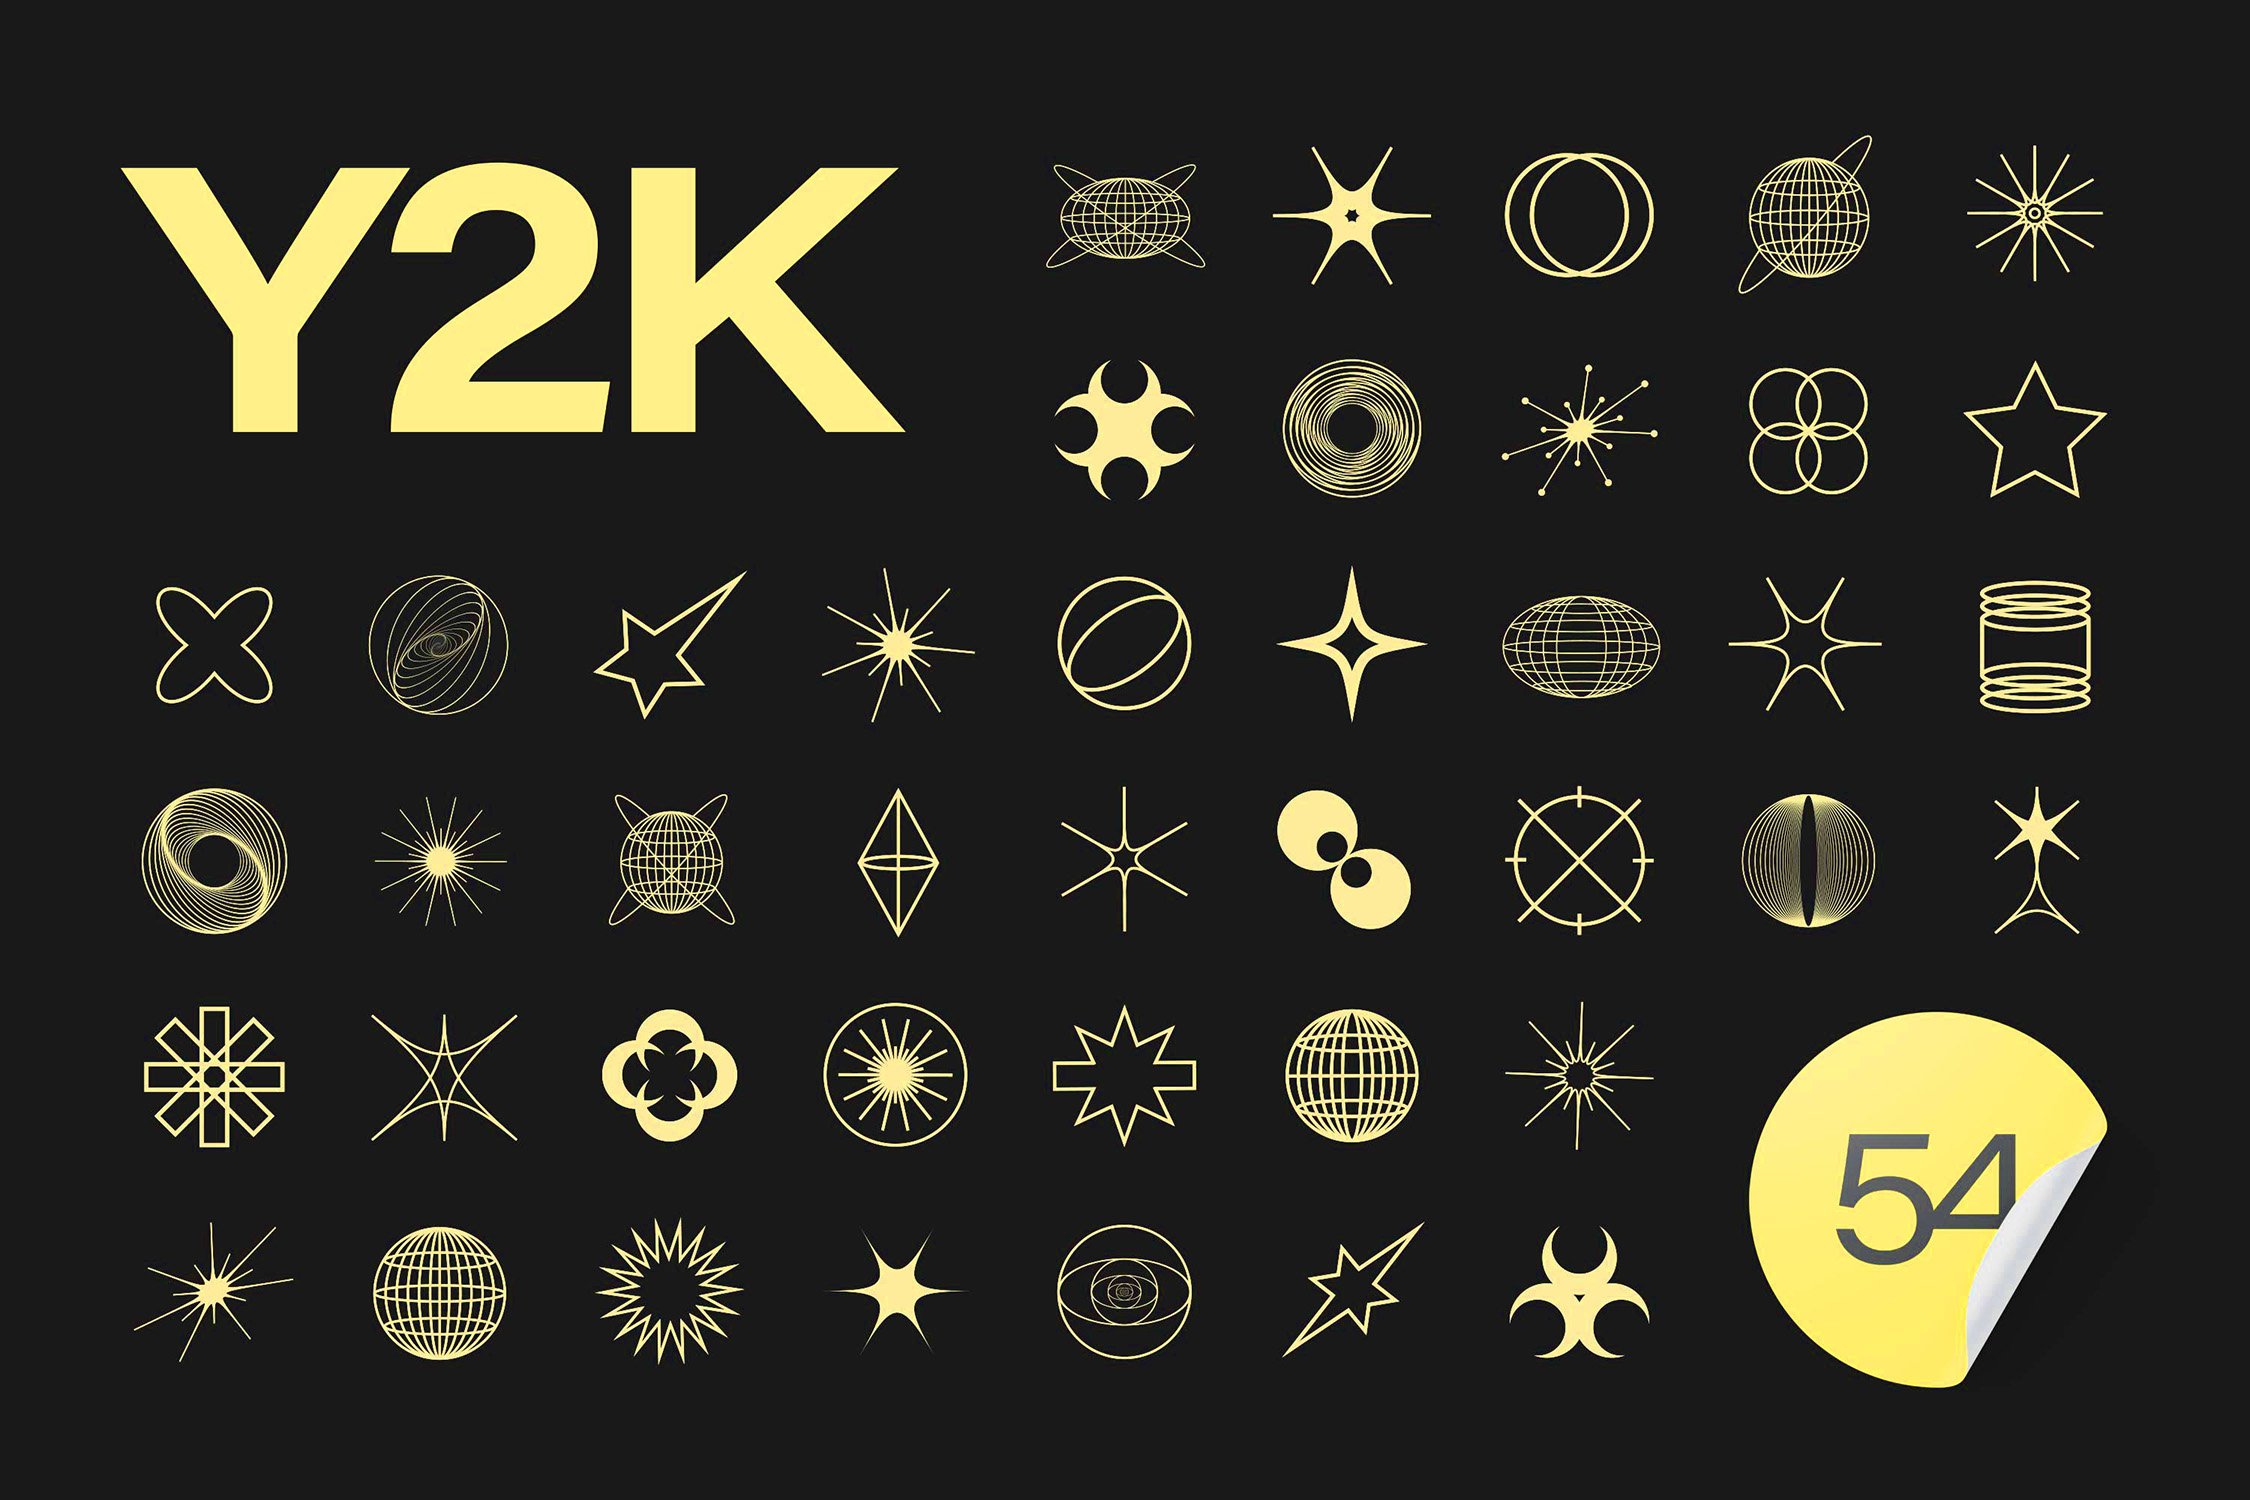 Y2k Style Symbols And Design Elements Collection Of Abstract And